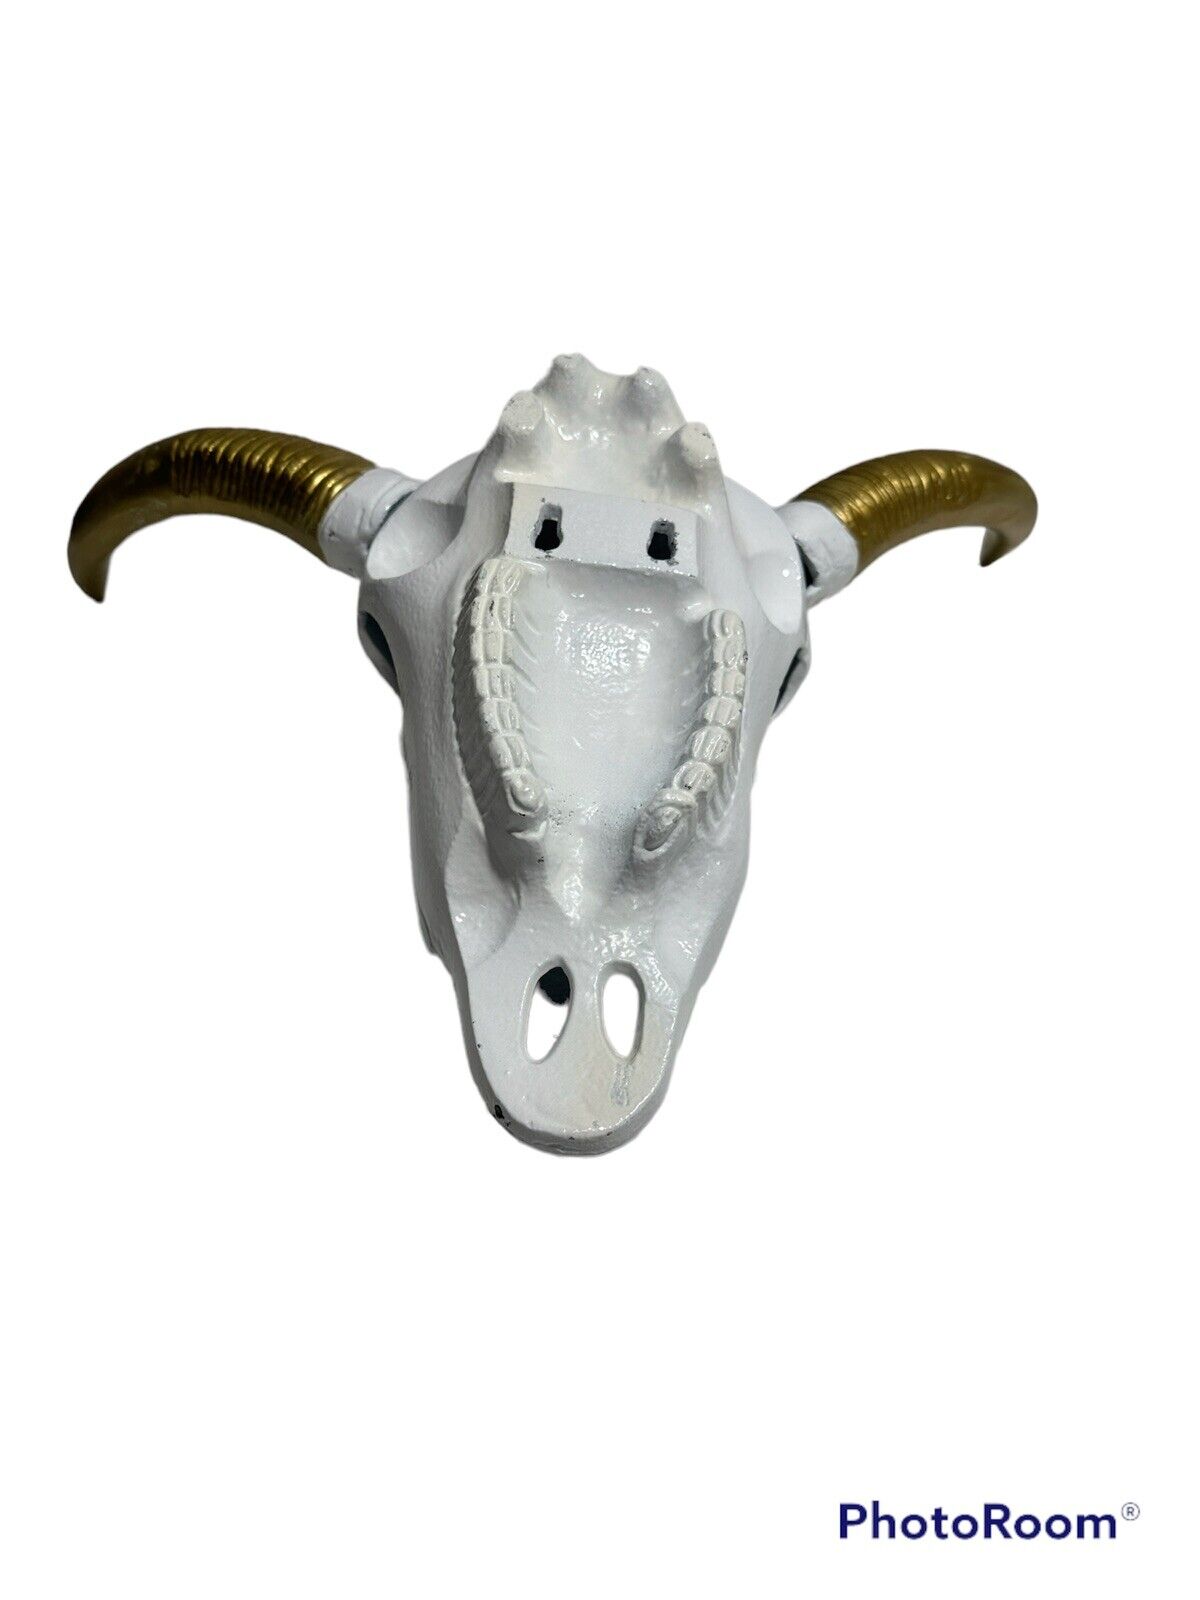 Cow Skull Decorative Metallic Wall Decor White and Gold Faux Western Heavy